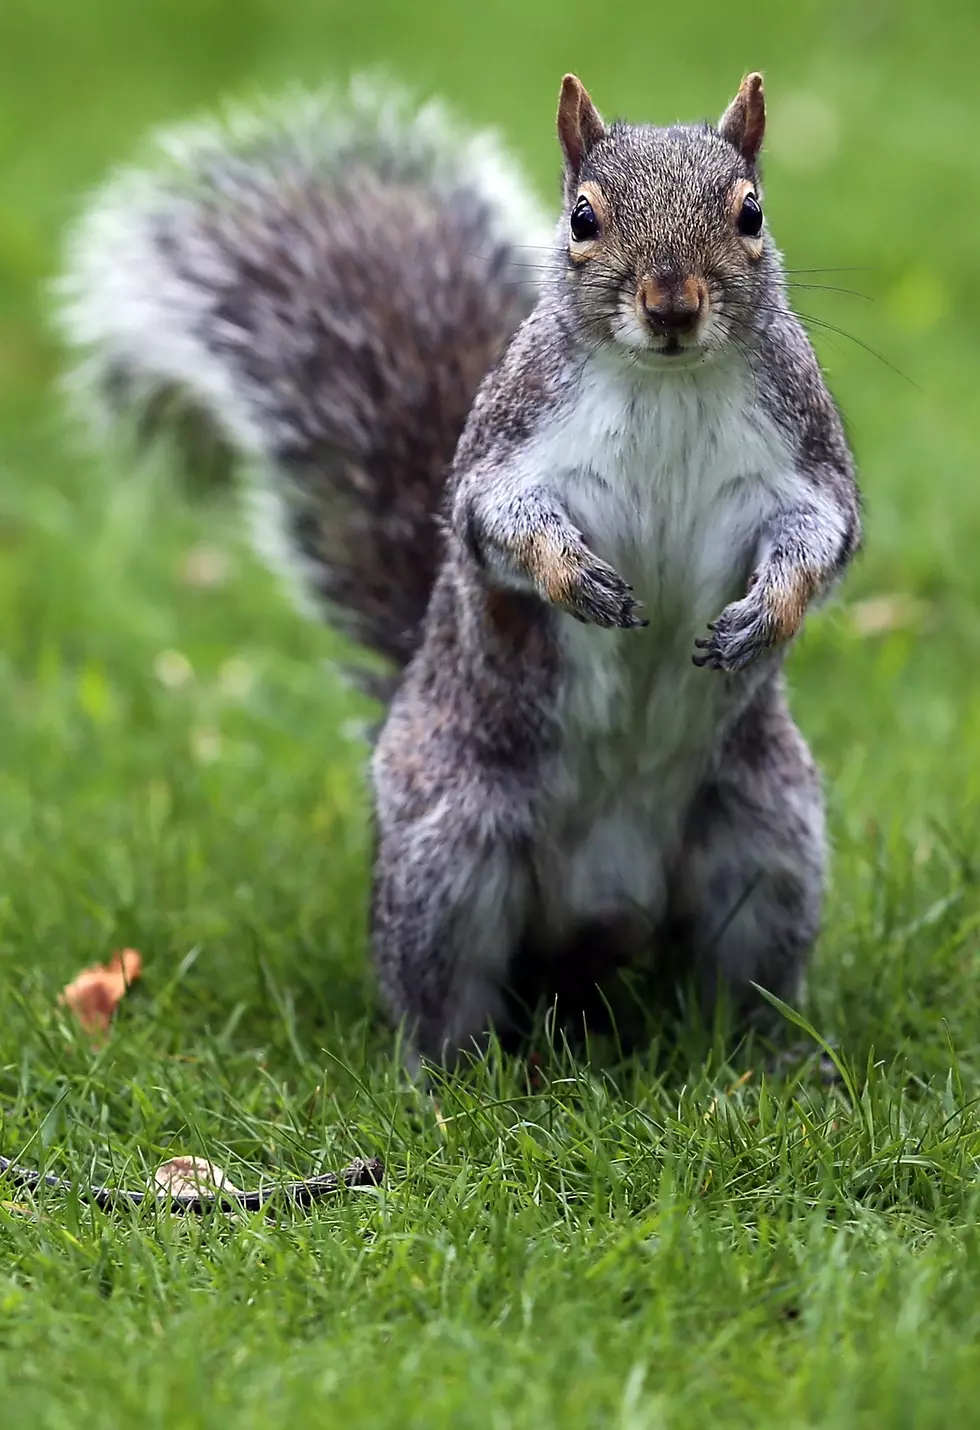 How To Stop A Squirrel From Stealing [VIDEO]